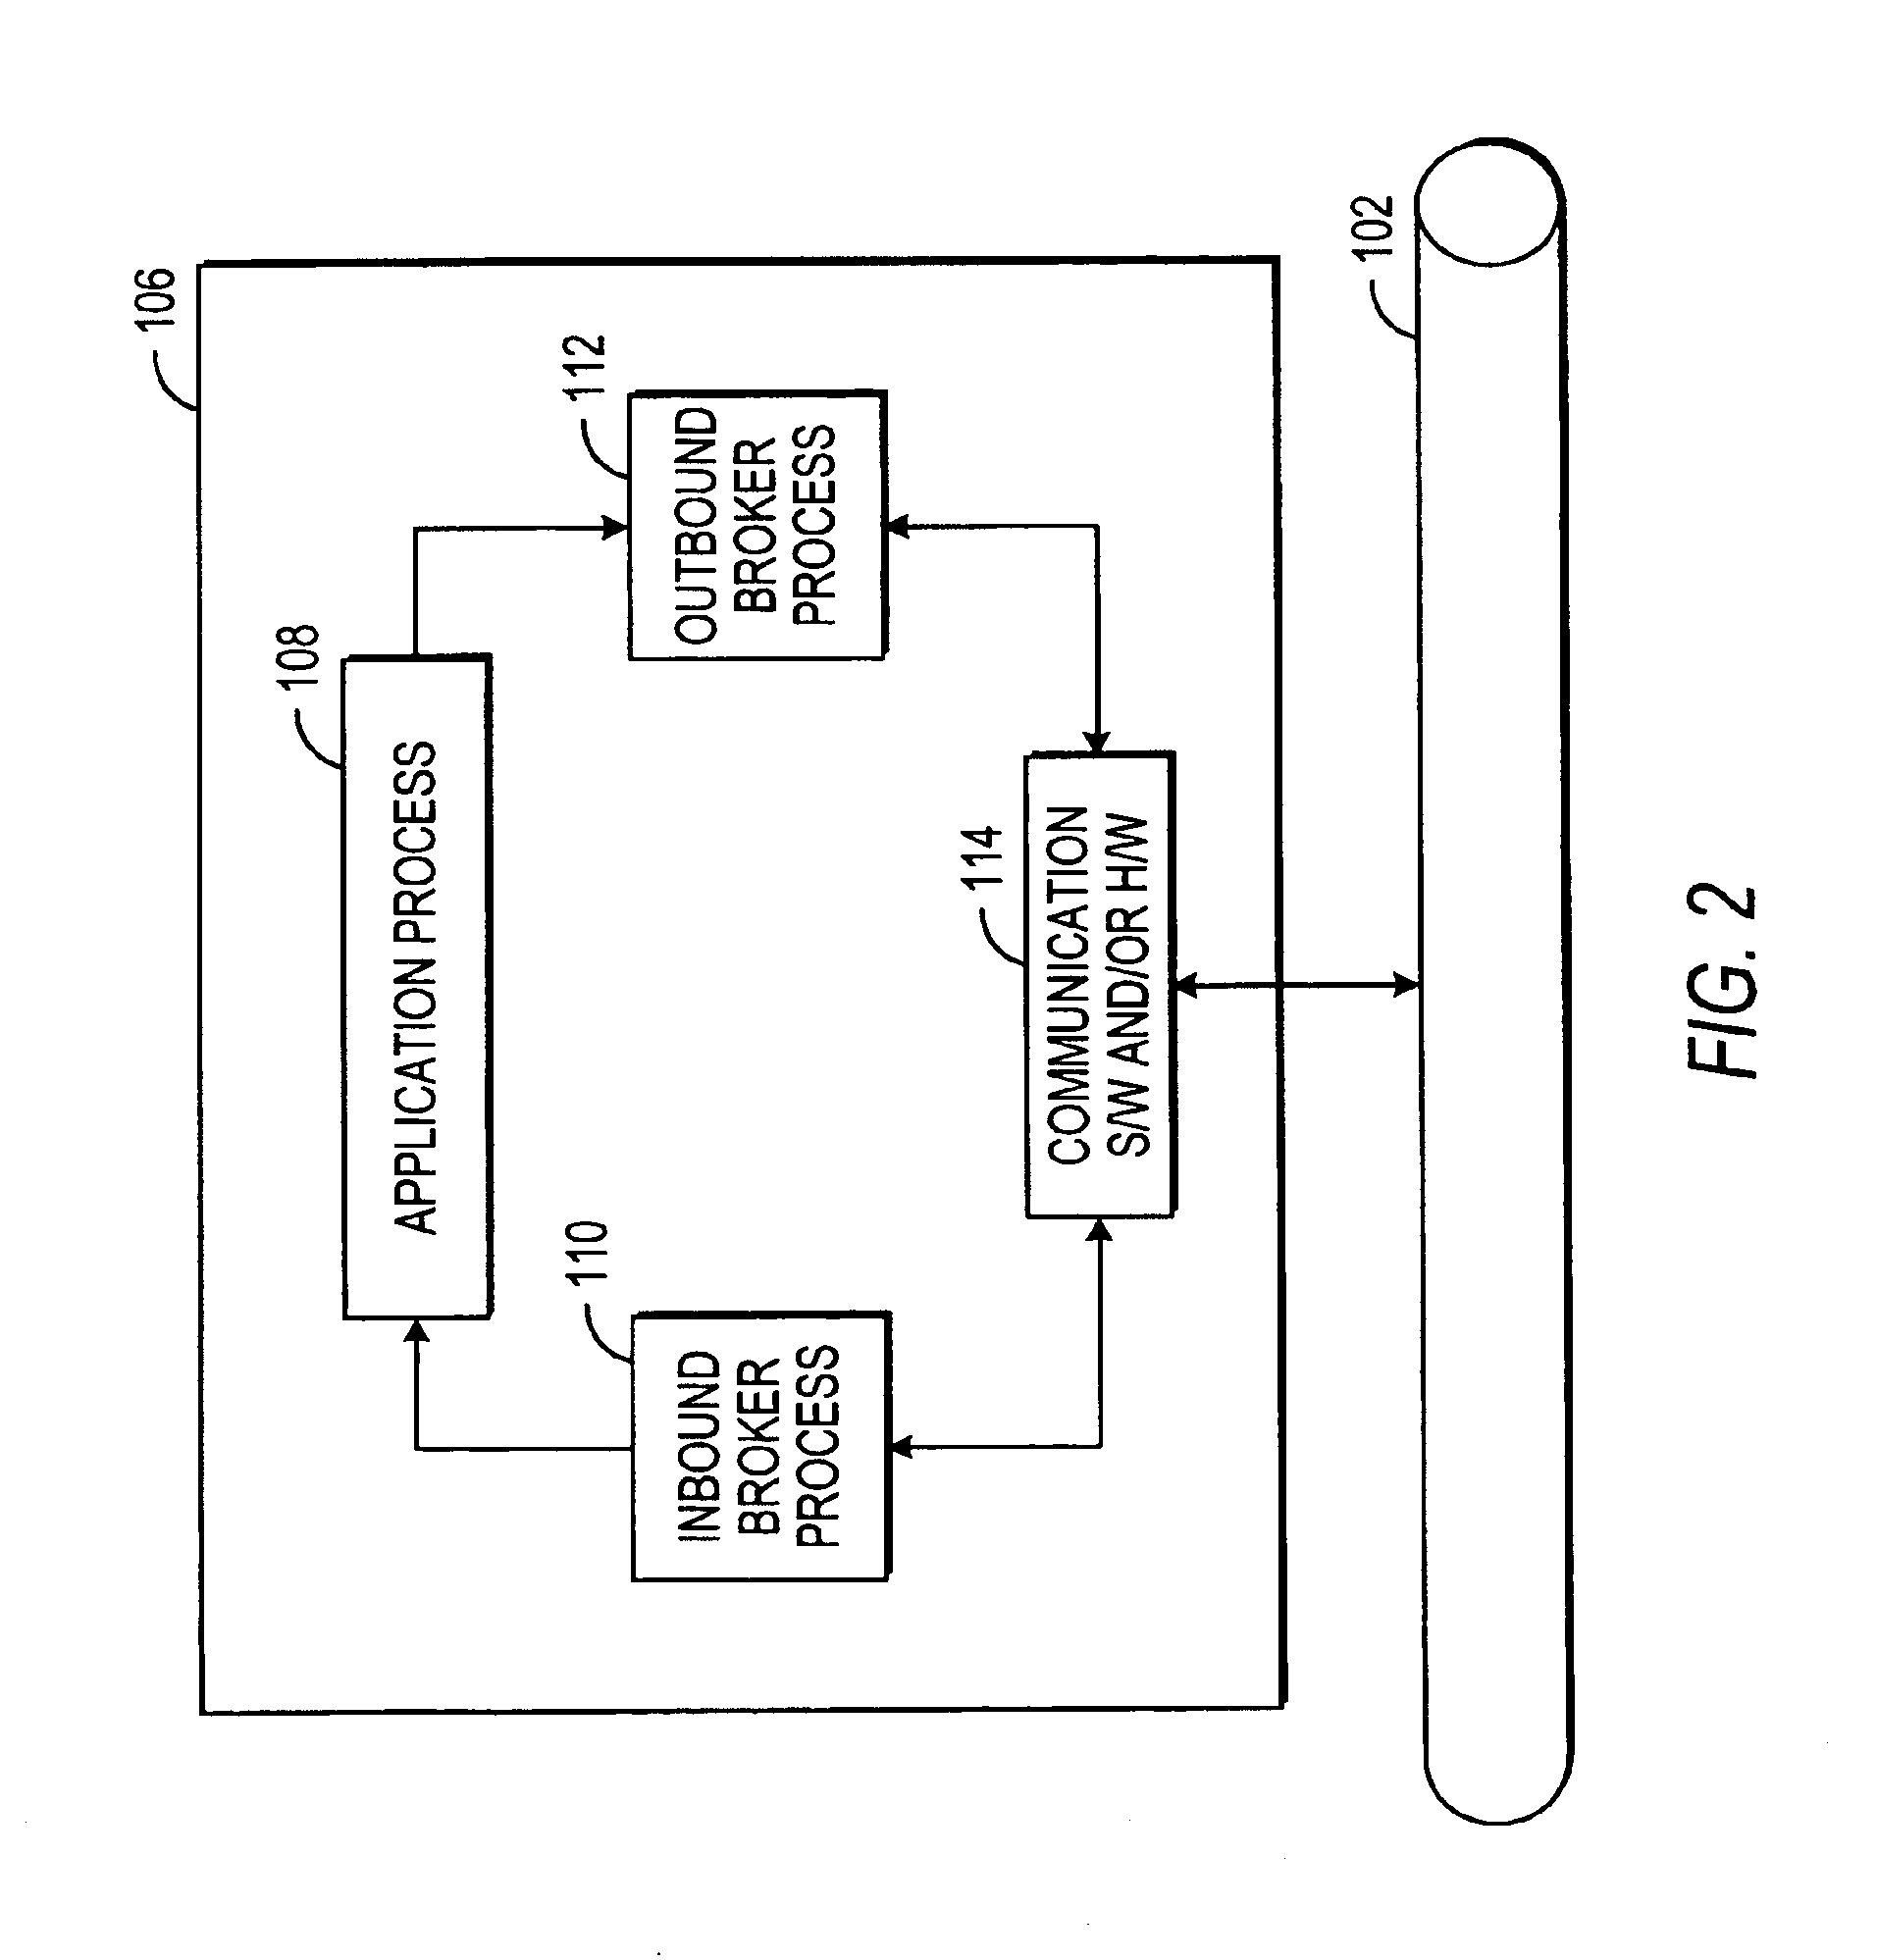 System and method for communicating data